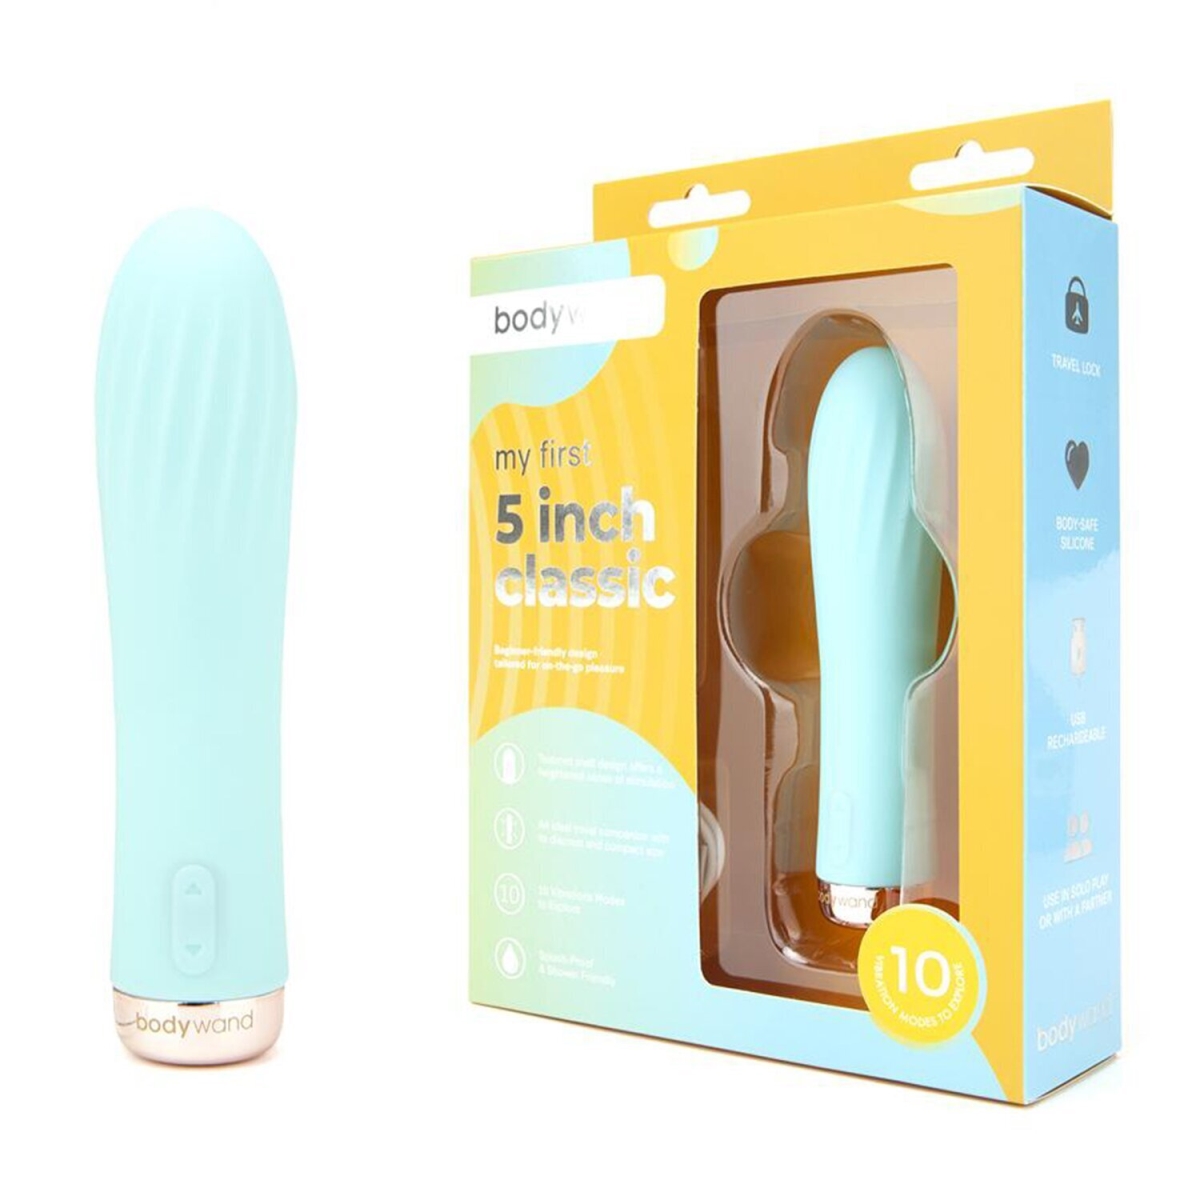 Picture of Body Wand 303537 5 in. My First Classic Vibrator